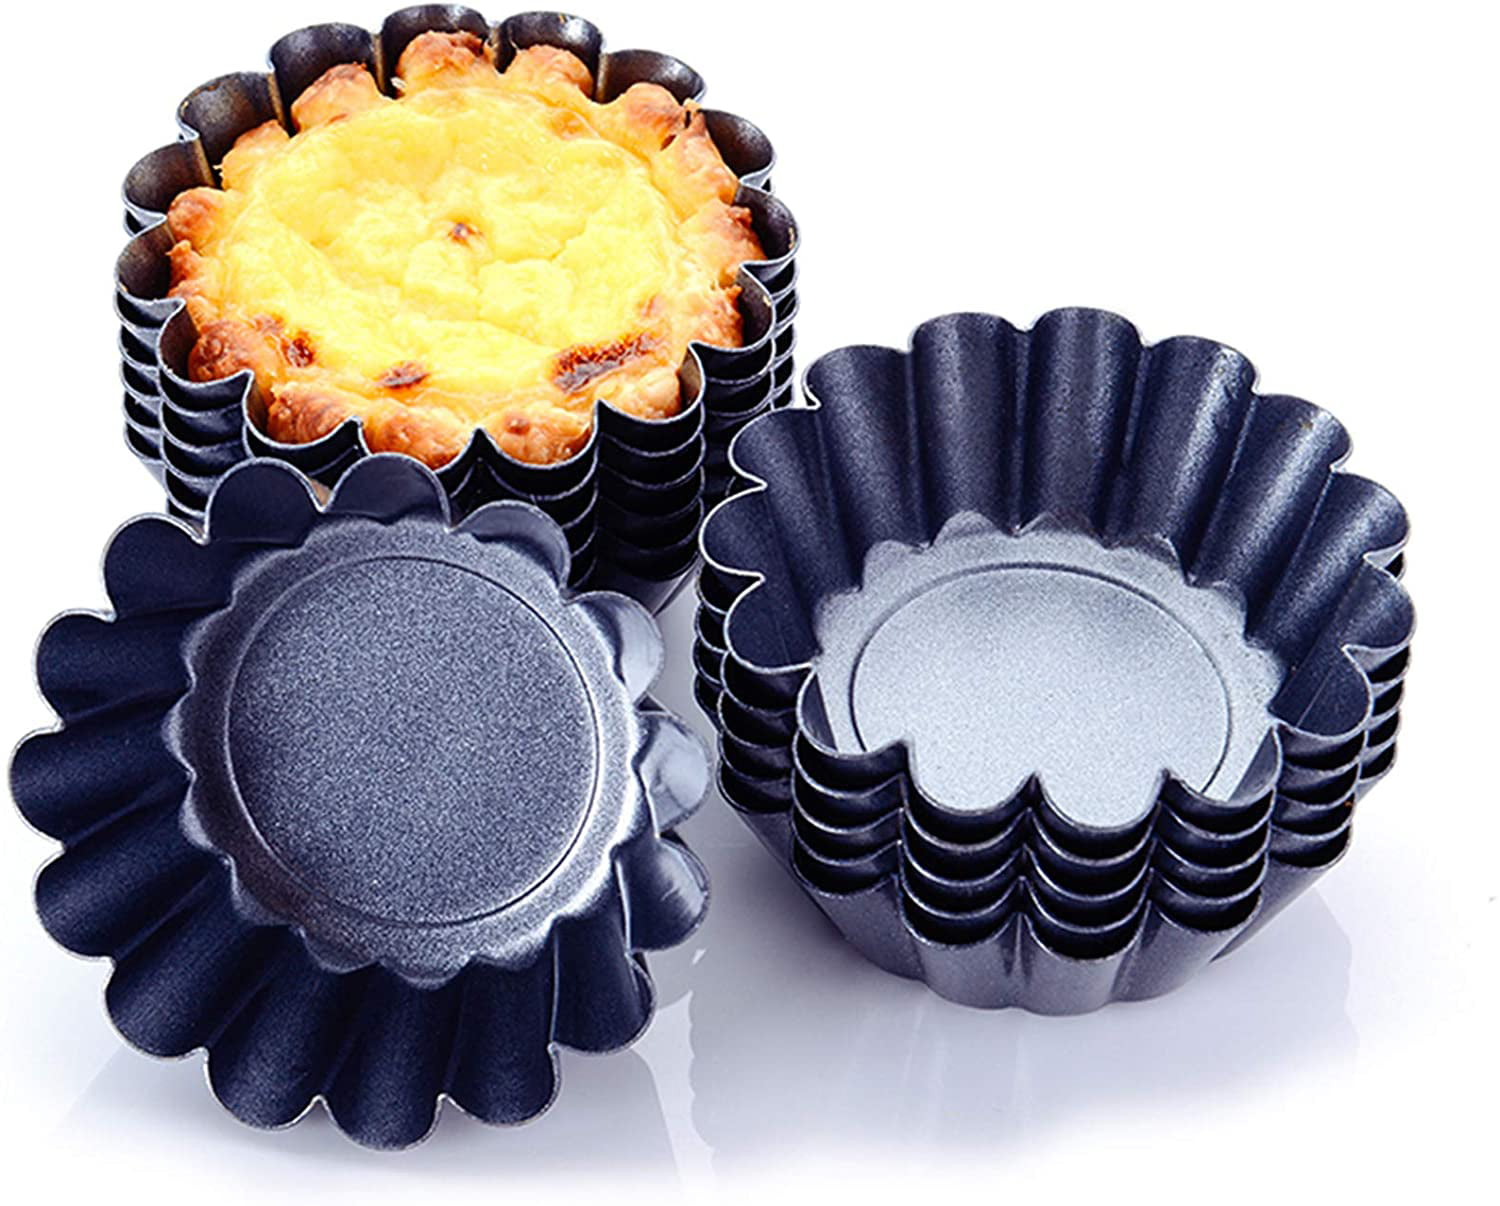 6/12pcs Steel Round Mini Cup Cake Muffin Cupcake Egg Tart Cases Baking Mould